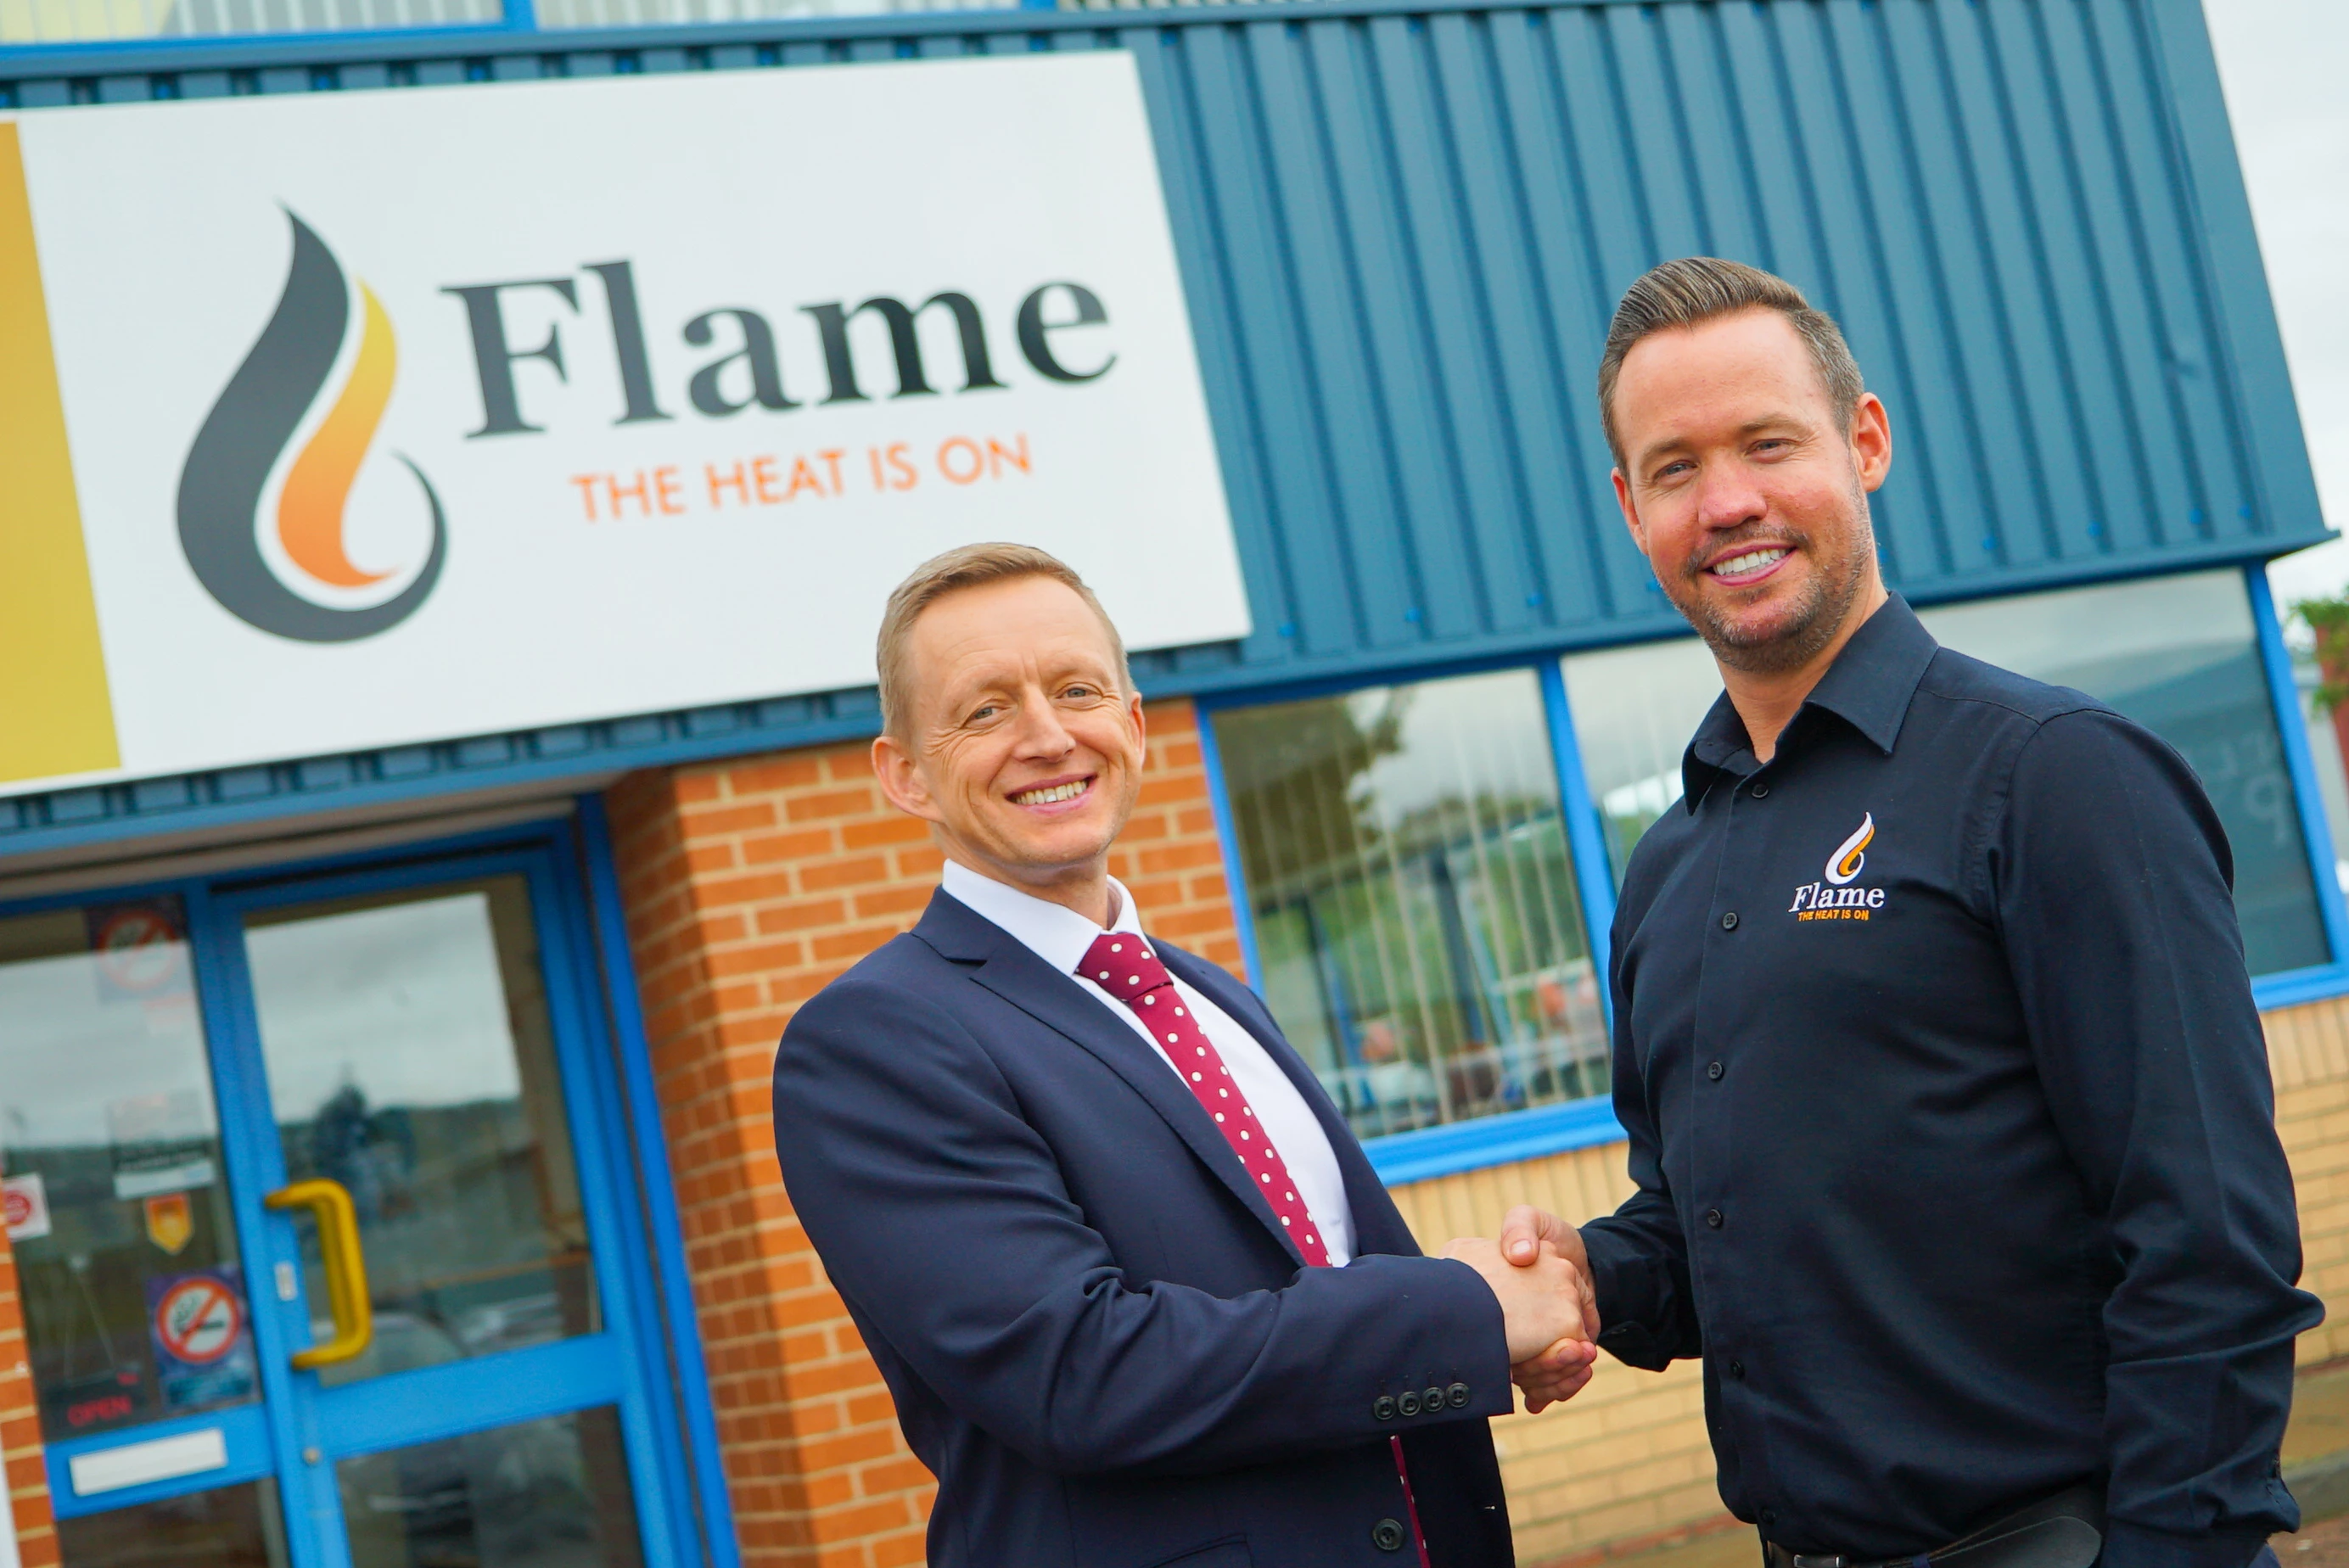 Flame heating group